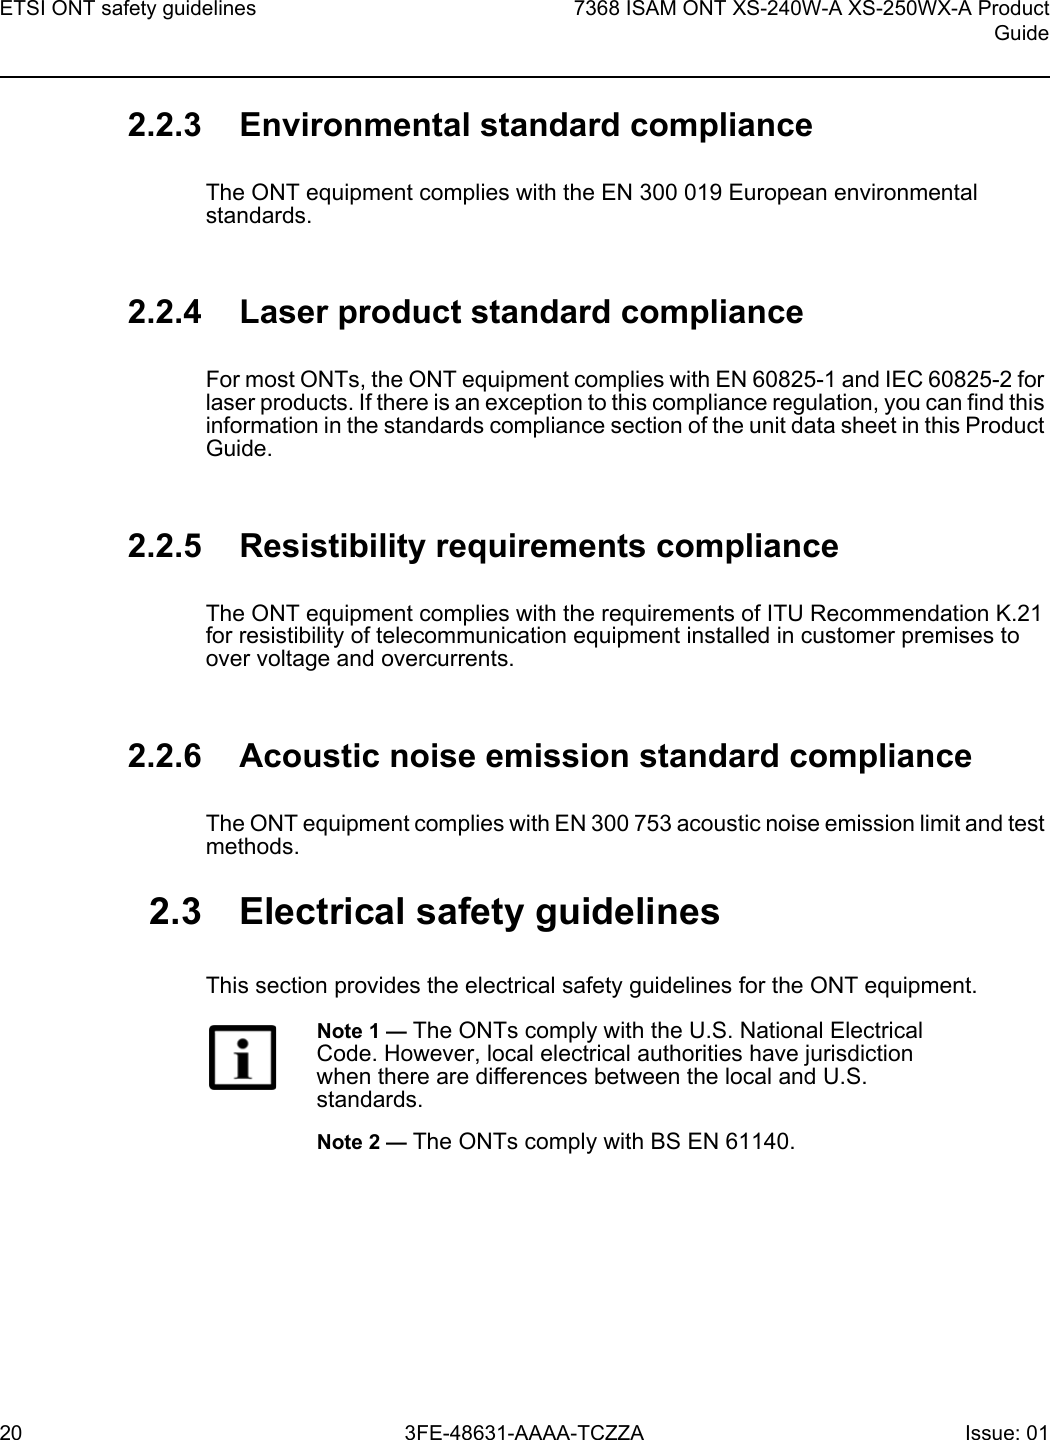 ETSI ONT safety guidelines207368 ISAM ONT XS-240W-A XS-250WX-A ProductGuide3FE-48631-AAAA-TCZZA Issue: 01 2.2.3 Environmental standard complianceThe ONT equipment complies with the EN 300 019 European environmental standards.2.2.4 Laser product standard complianceFor most ONTs, the ONT equipment complies with EN 60825-1 and IEC 60825-2 for laser products. If there is an exception to this compliance regulation, you can find this information in the standards compliance section of the unit data sheet in this Product Guide.2.2.5 Resistibility requirements complianceThe ONT equipment complies with the requirements of ITU Recommendation K.21 for resistibility of telecommunication equipment installed in customer premises to over voltage and overcurrents.2.2.6 Acoustic noise emission standard complianceThe ONT equipment complies with EN 300 753 acoustic noise emission limit and test methods. 2.3 Electrical safety guidelinesThis section provides the electrical safety guidelines for the ONT equipment.Note 1 — The ONTs comply with the U.S. National Electrical Code. However, local electrical authorities have jurisdiction when there are differences between the local and U.S. standards.Note 2 — The ONTs comply with BS EN 61140.